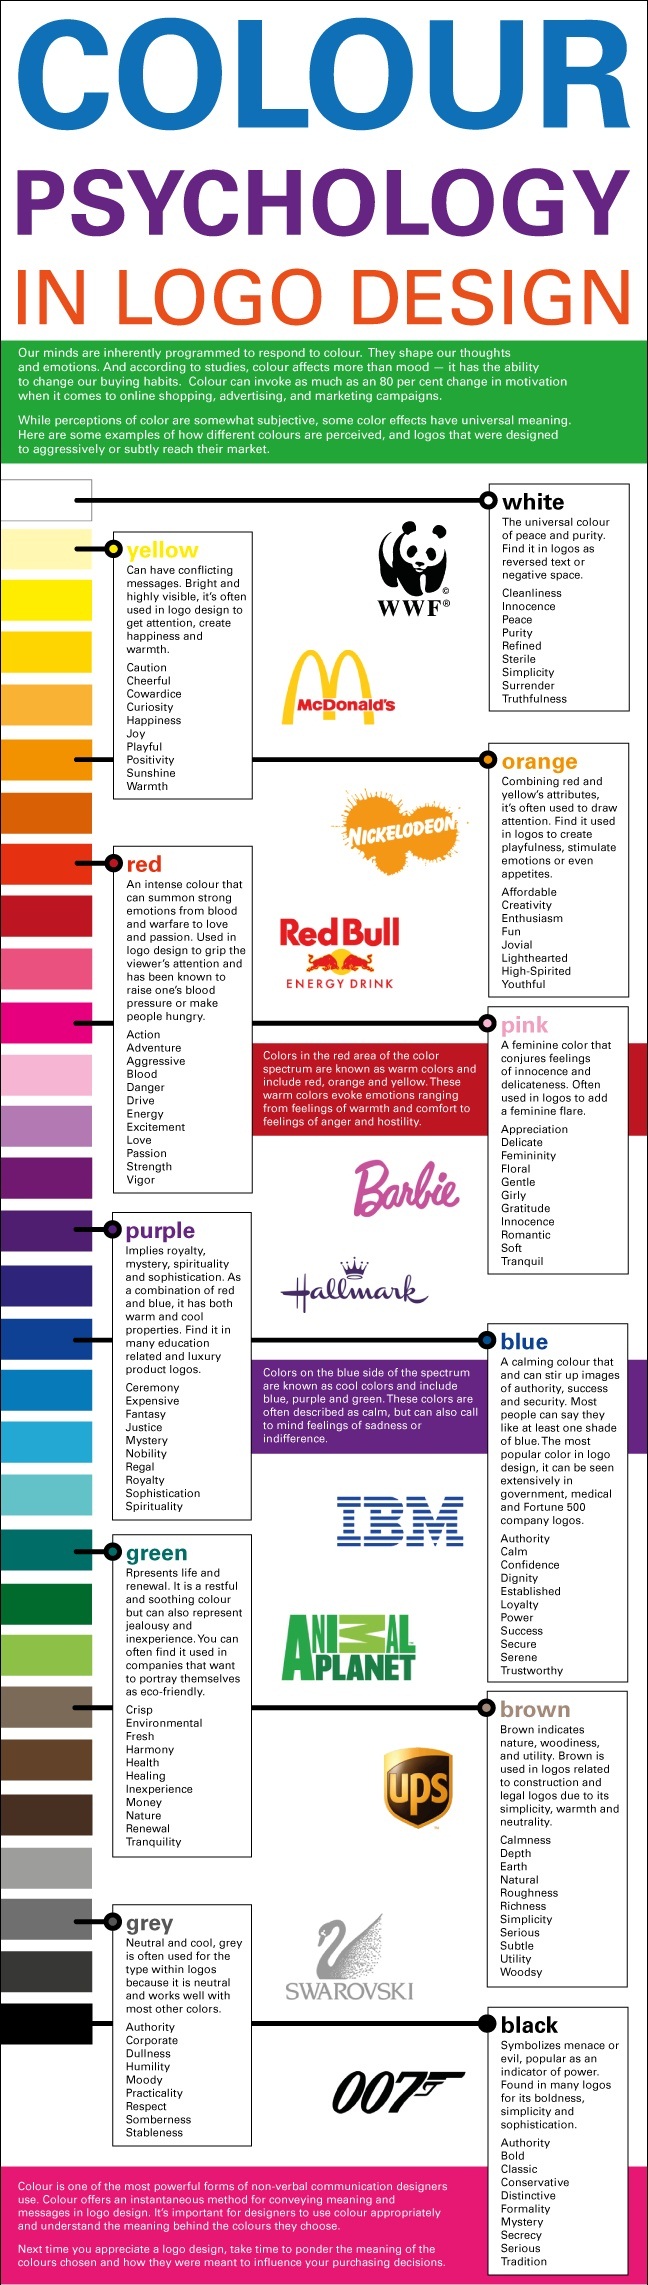 color psychology brand colors infographic